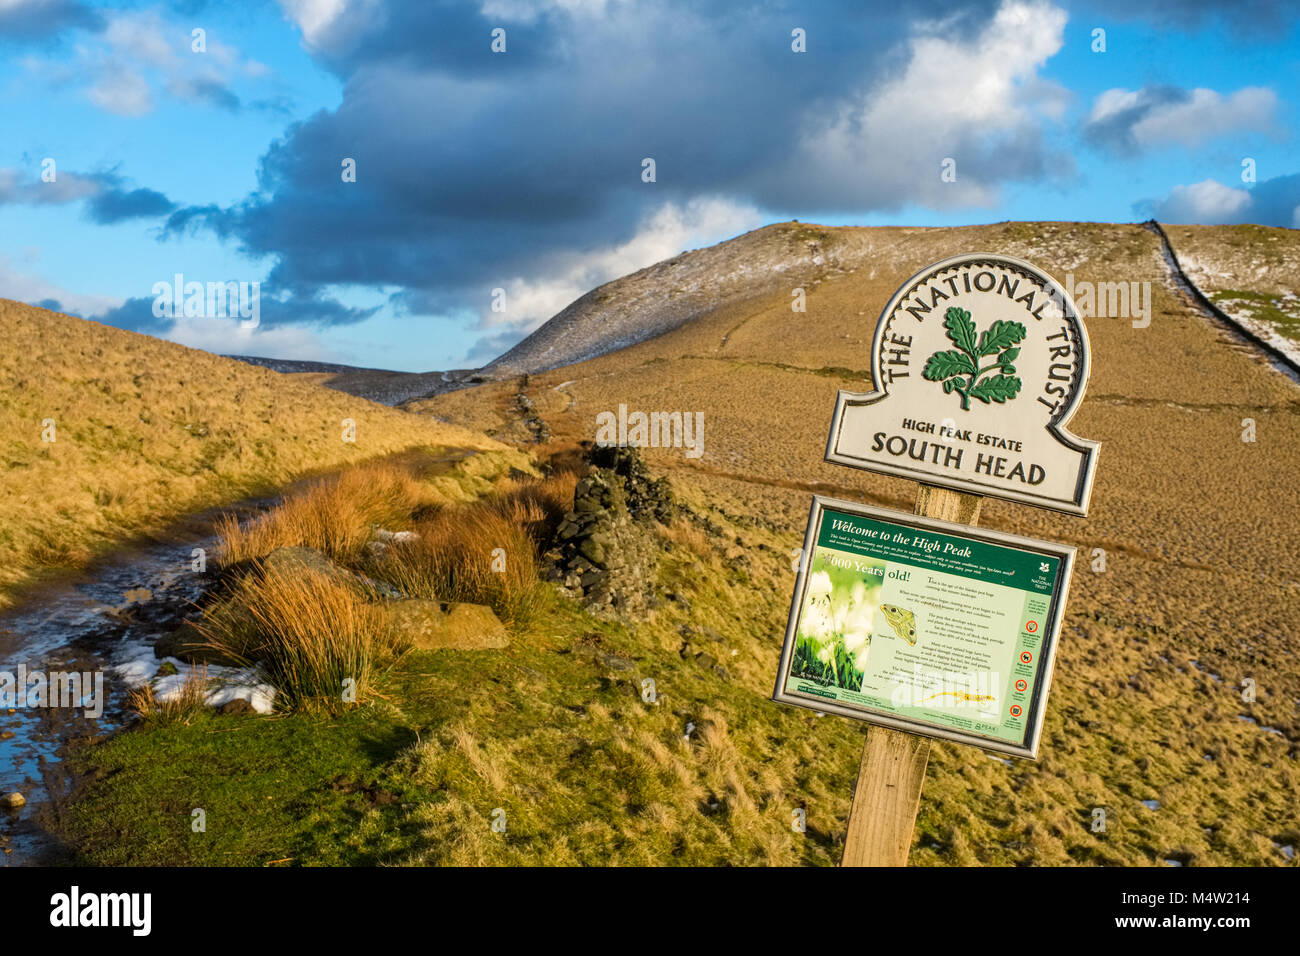 The National Trust sign at South Head in the Peak District National Park, on the Pennine Bridleway Stock Photo